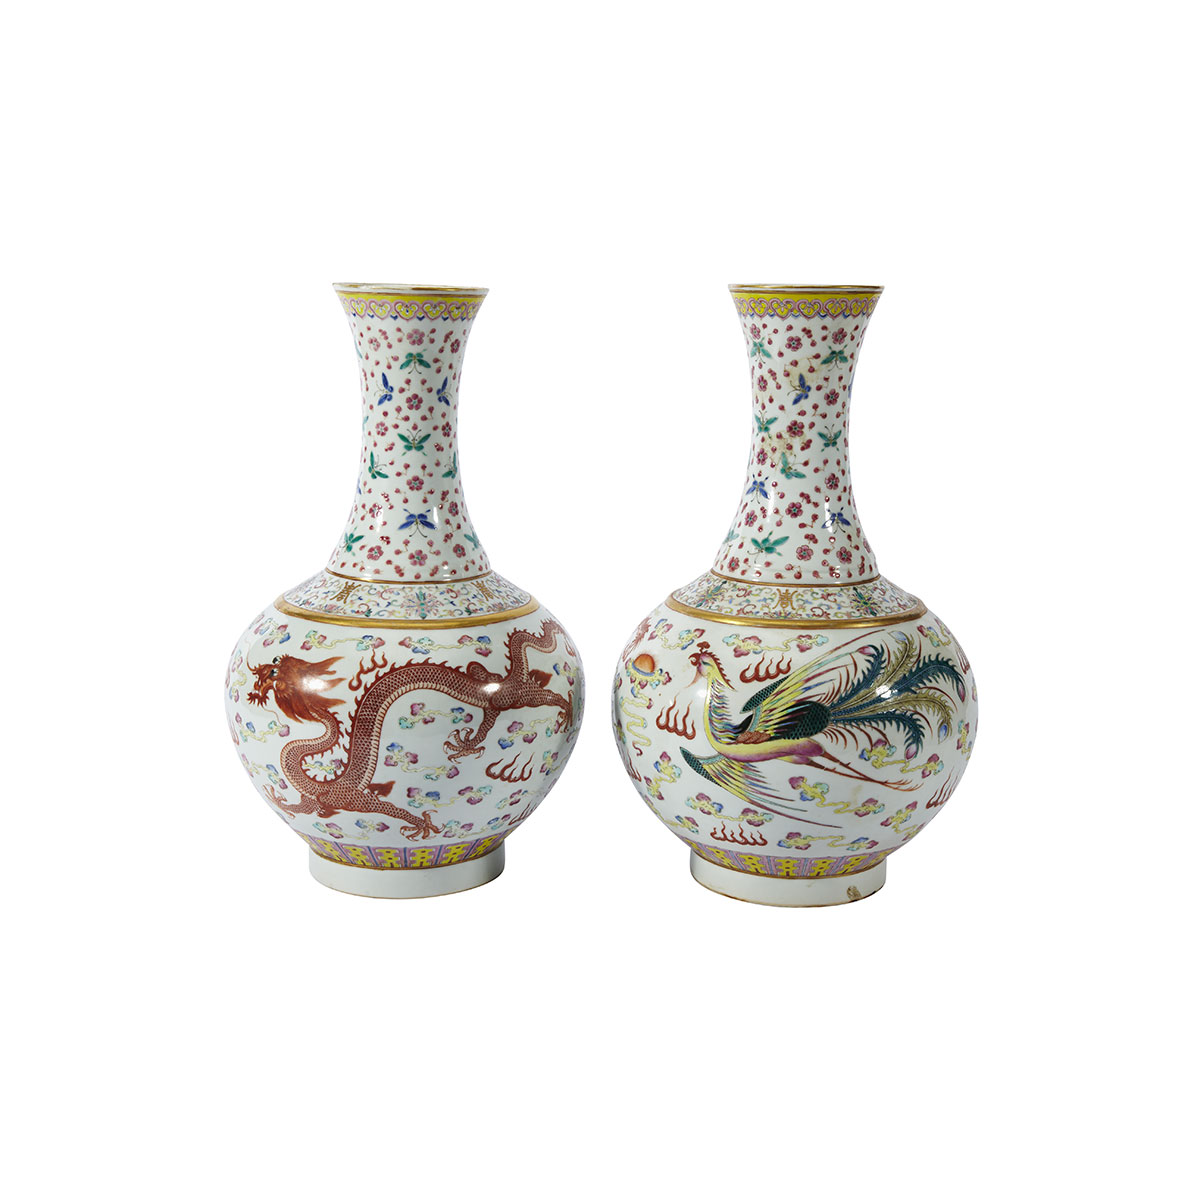 Pair of Famille Rose ‘Dragon and Phoenix’ Vases, Guangxu Mark and Period (1875-1908)